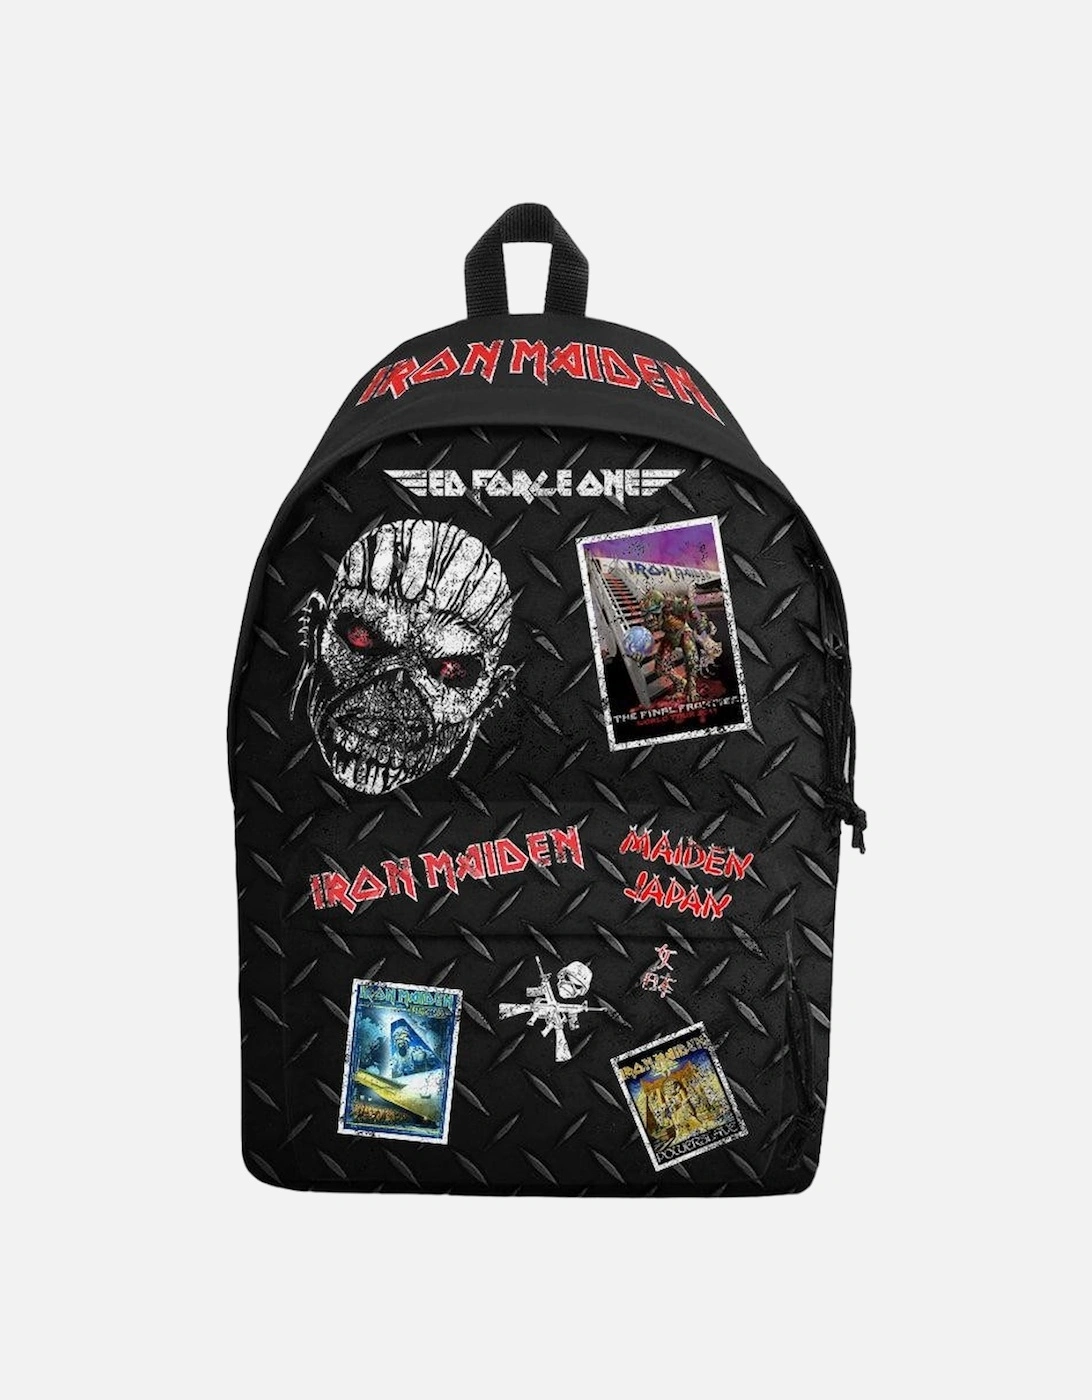 Tour Iron Maiden Backpack, 2 of 1